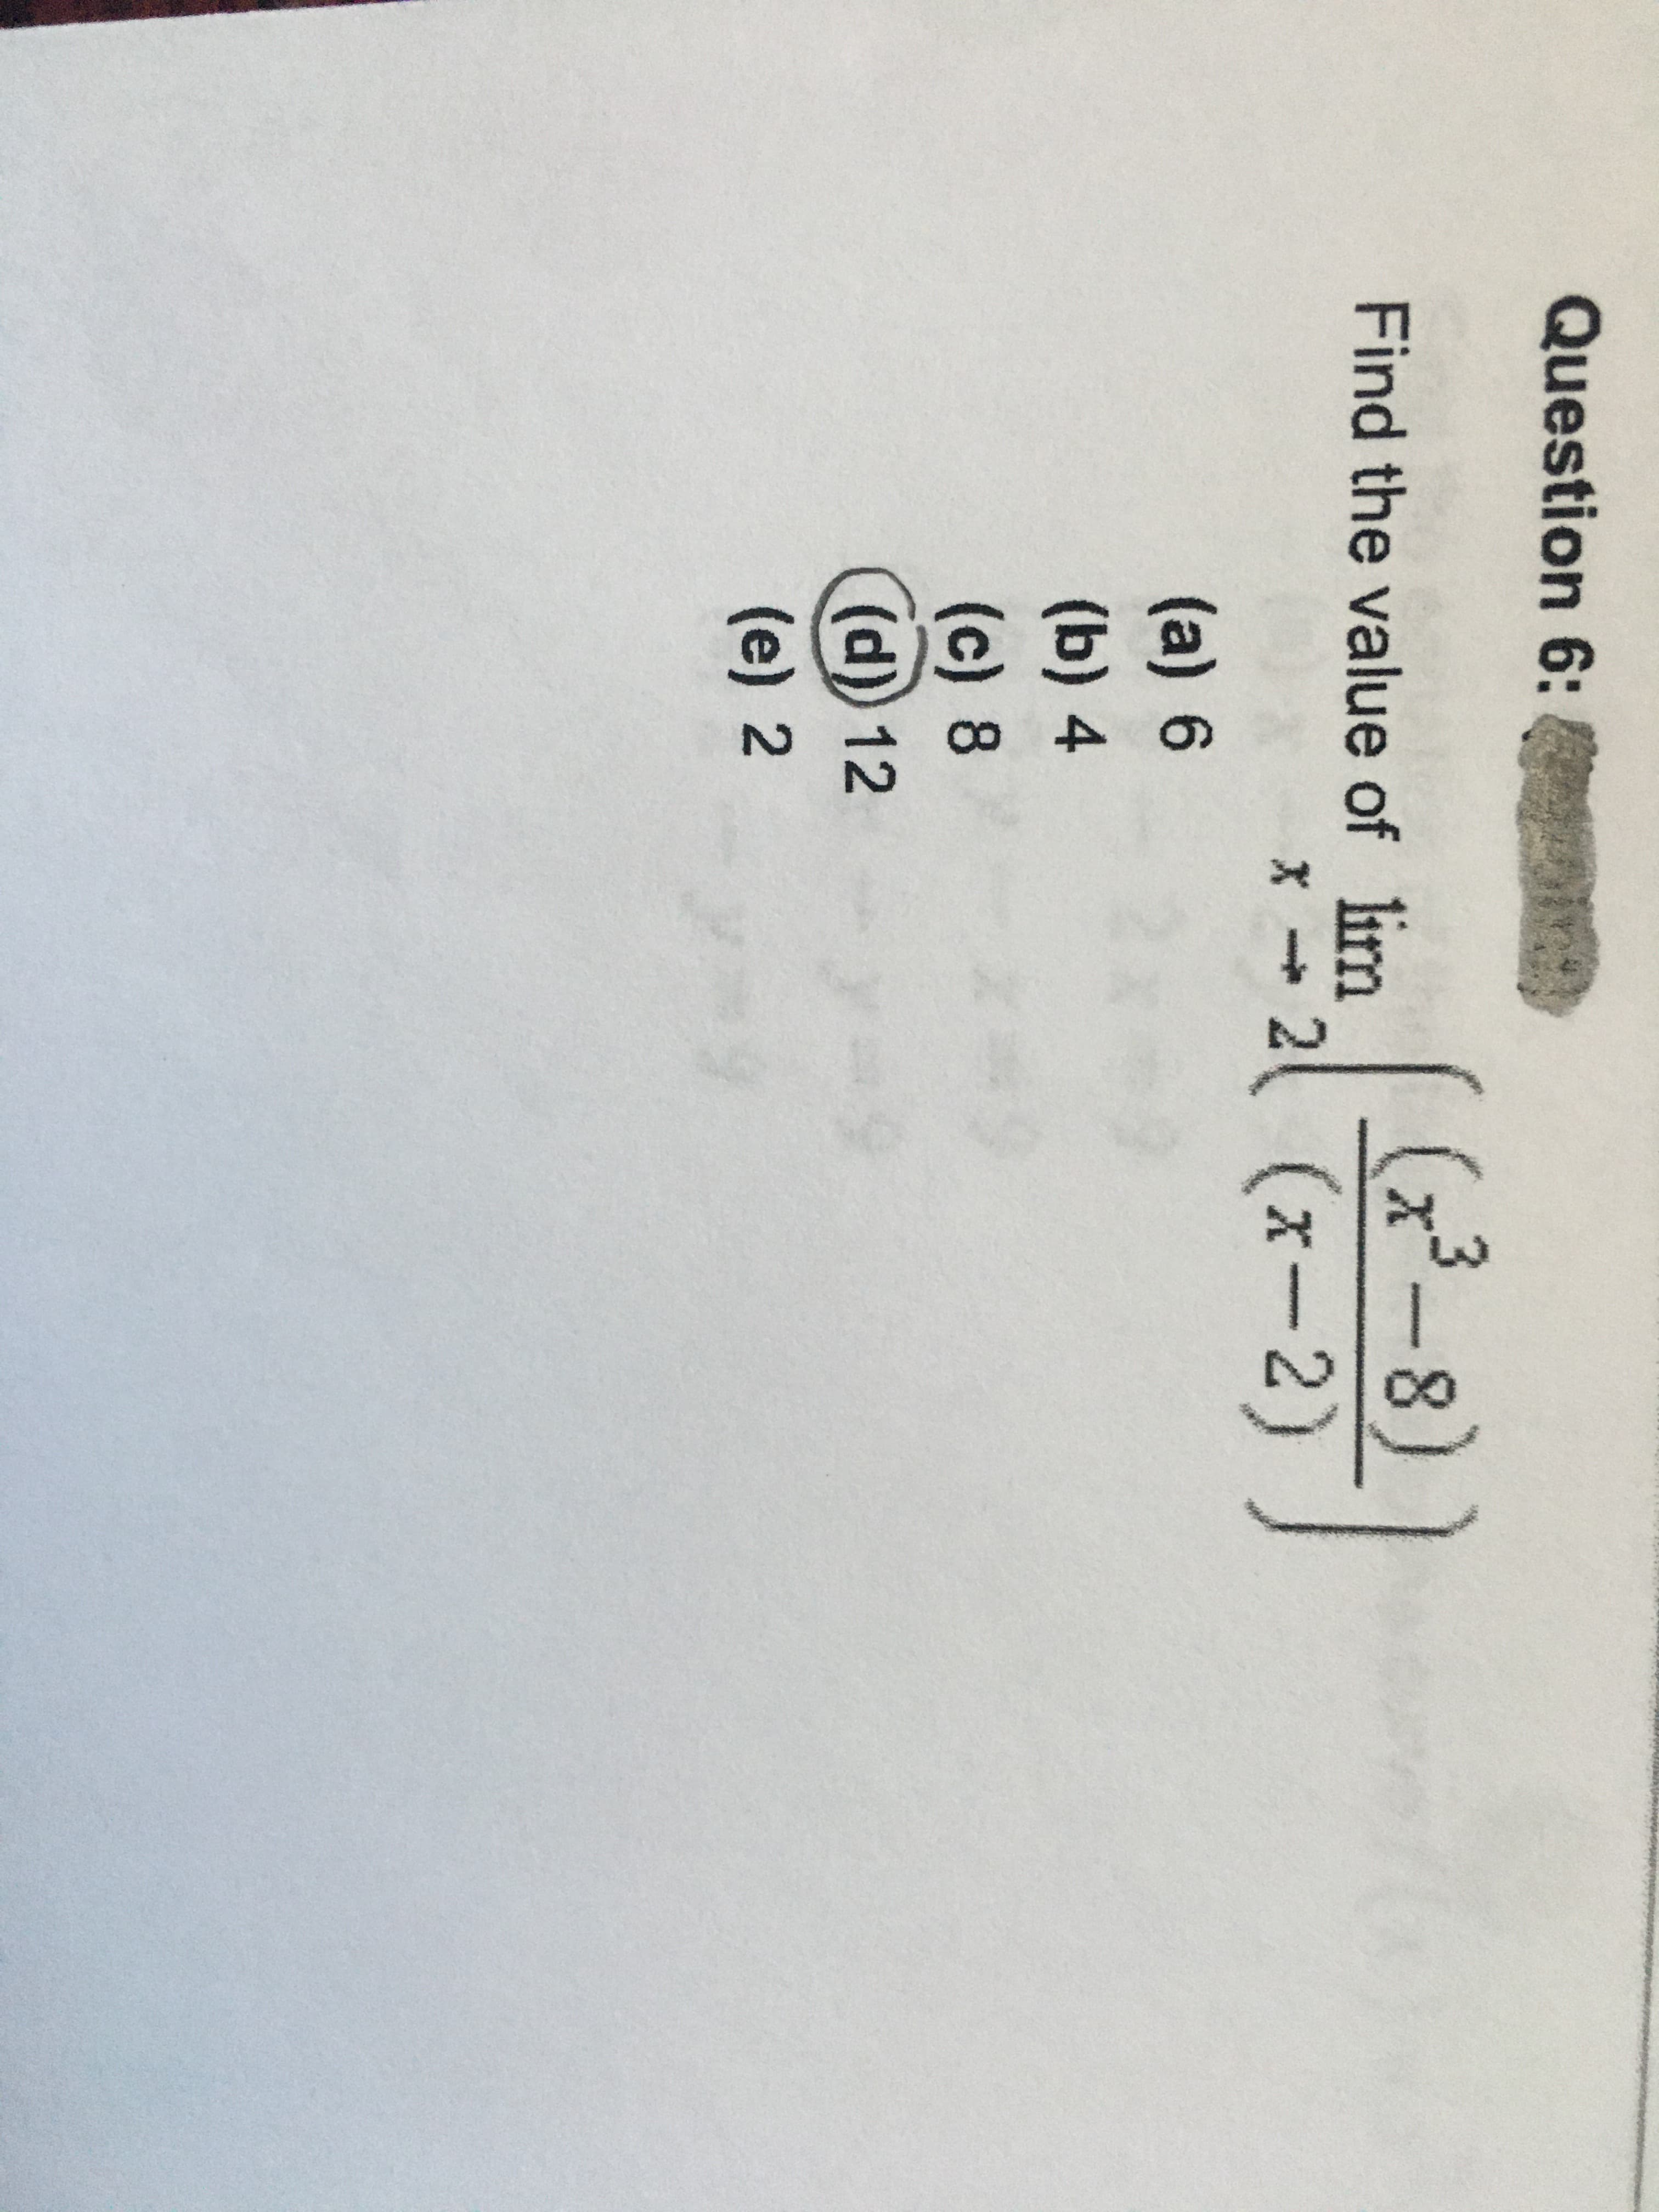 (7-8)
Find the value of lim
x2 (x-2)
